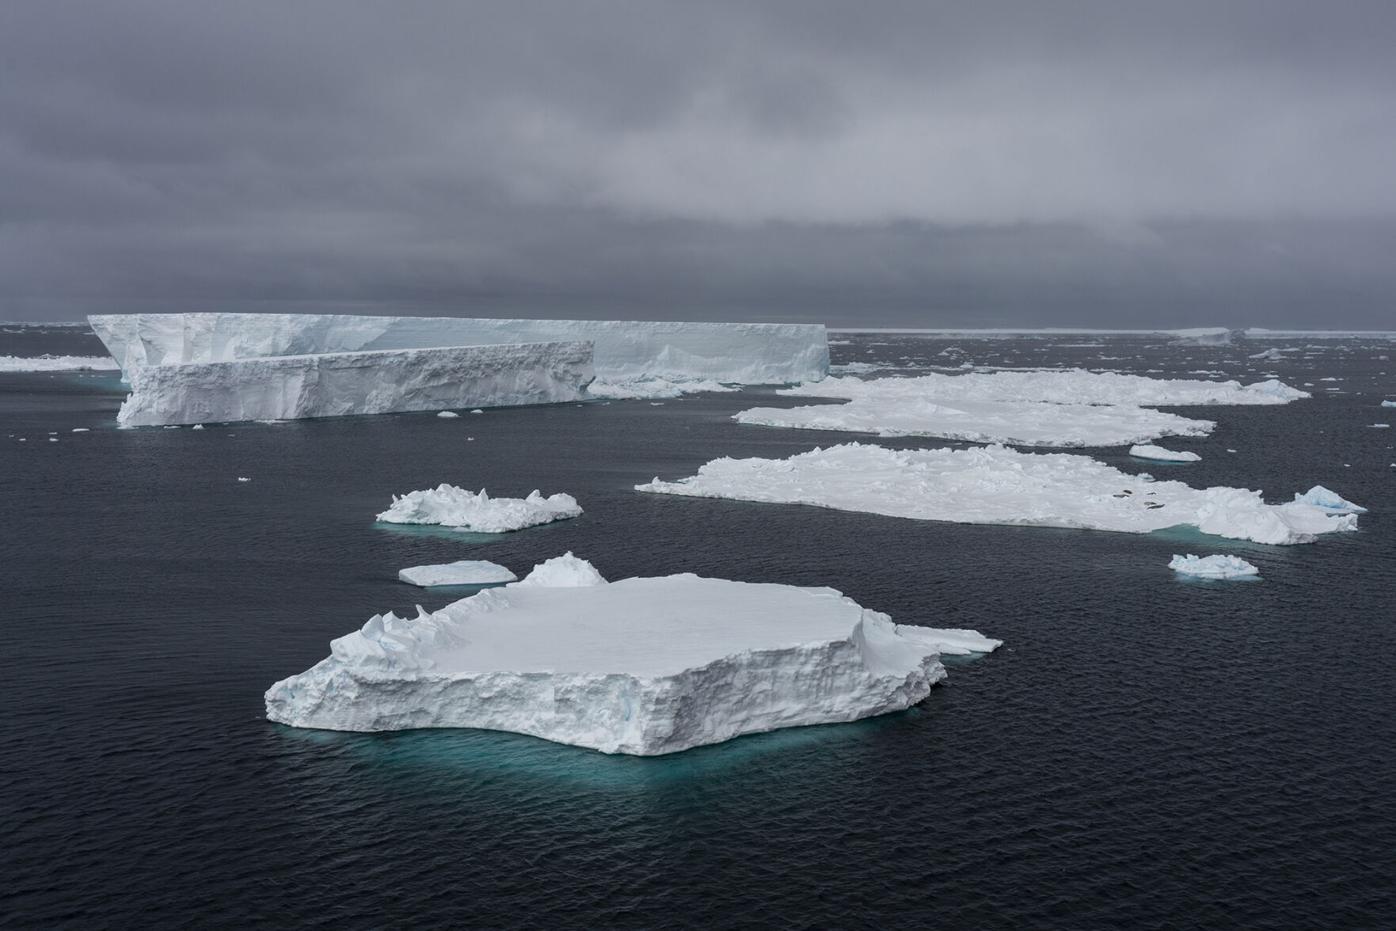 Greenland and Antarctic ice sheets are melting rapidly and driving